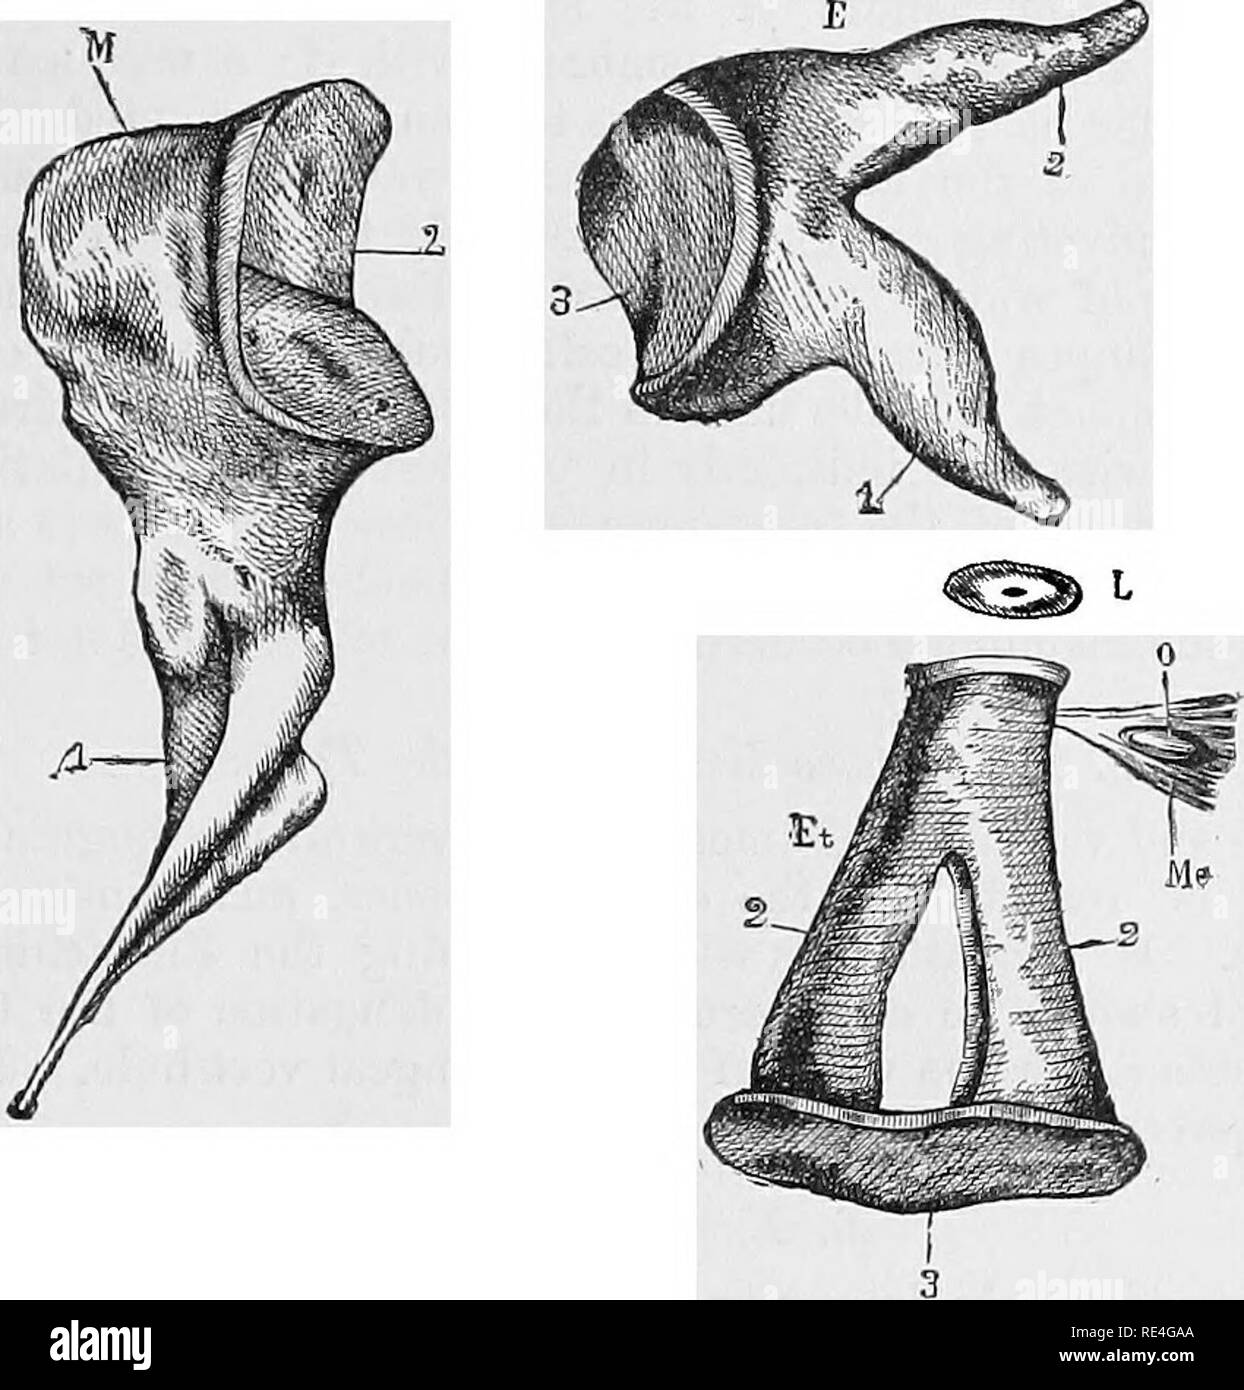 Artwork Of Prosthetic Stapes In Middle Ear Photograph by John